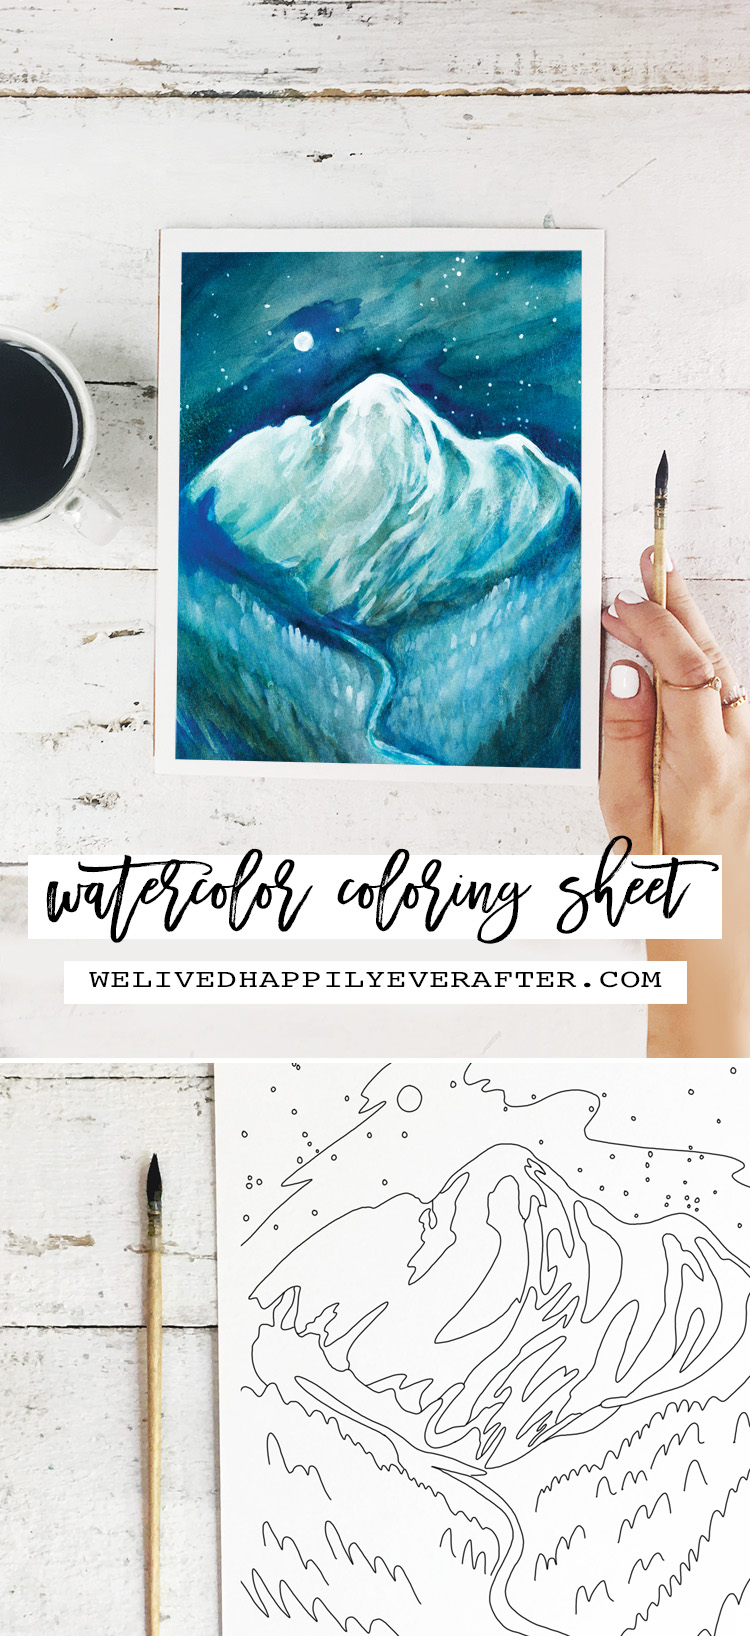 perfect!!! Easy watercolor diy!!!! Kids can do this!